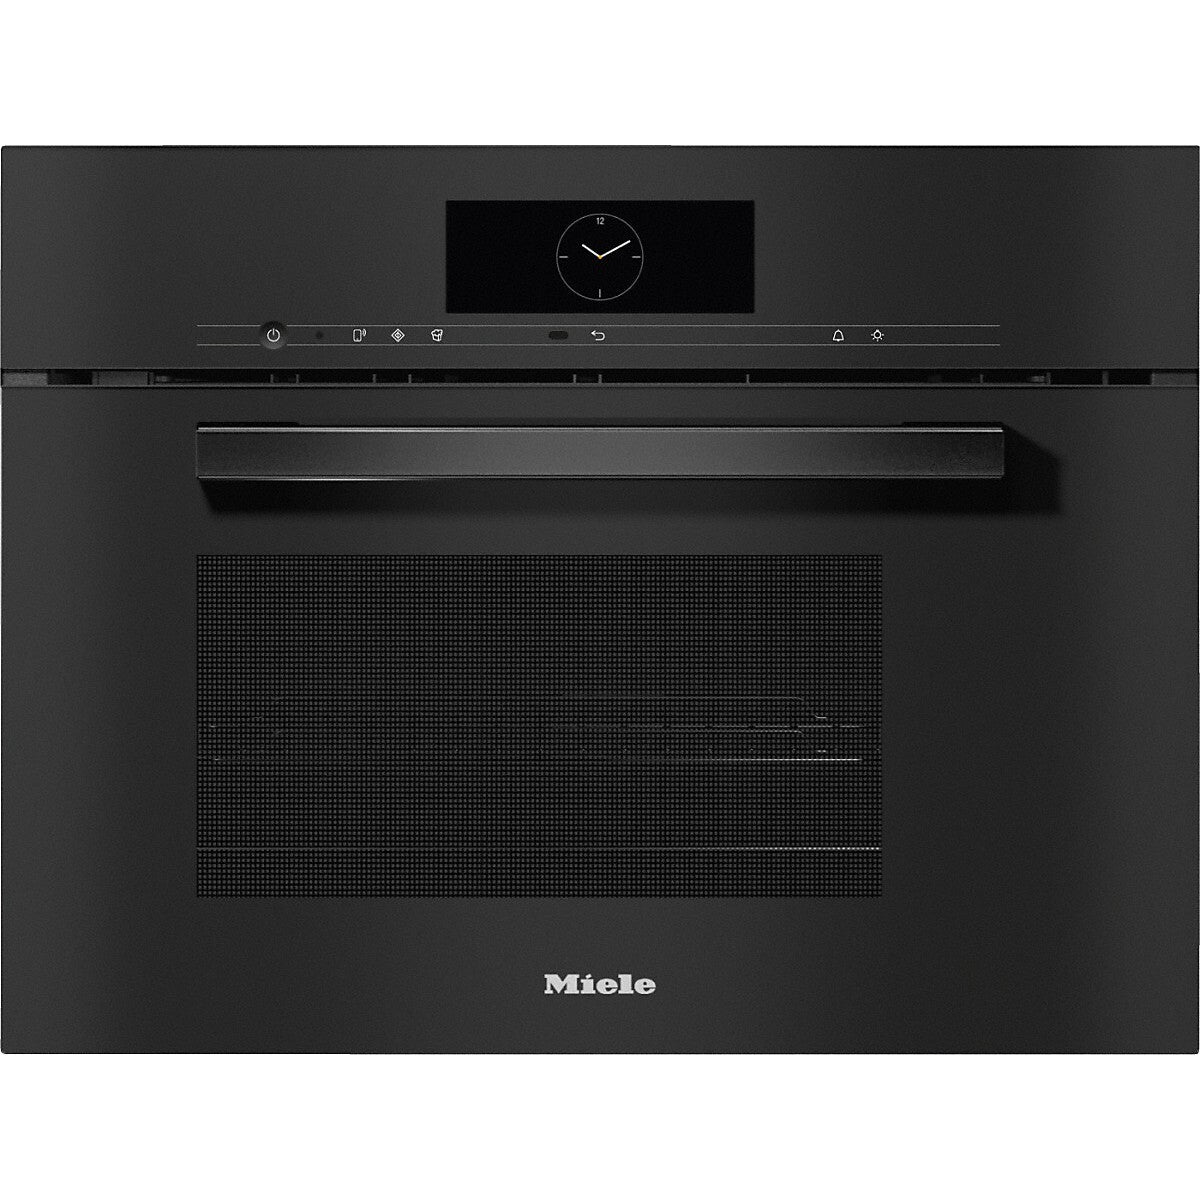 Miele 45cm Steam Oven with Microwave DGM 7845 Obsidian Black